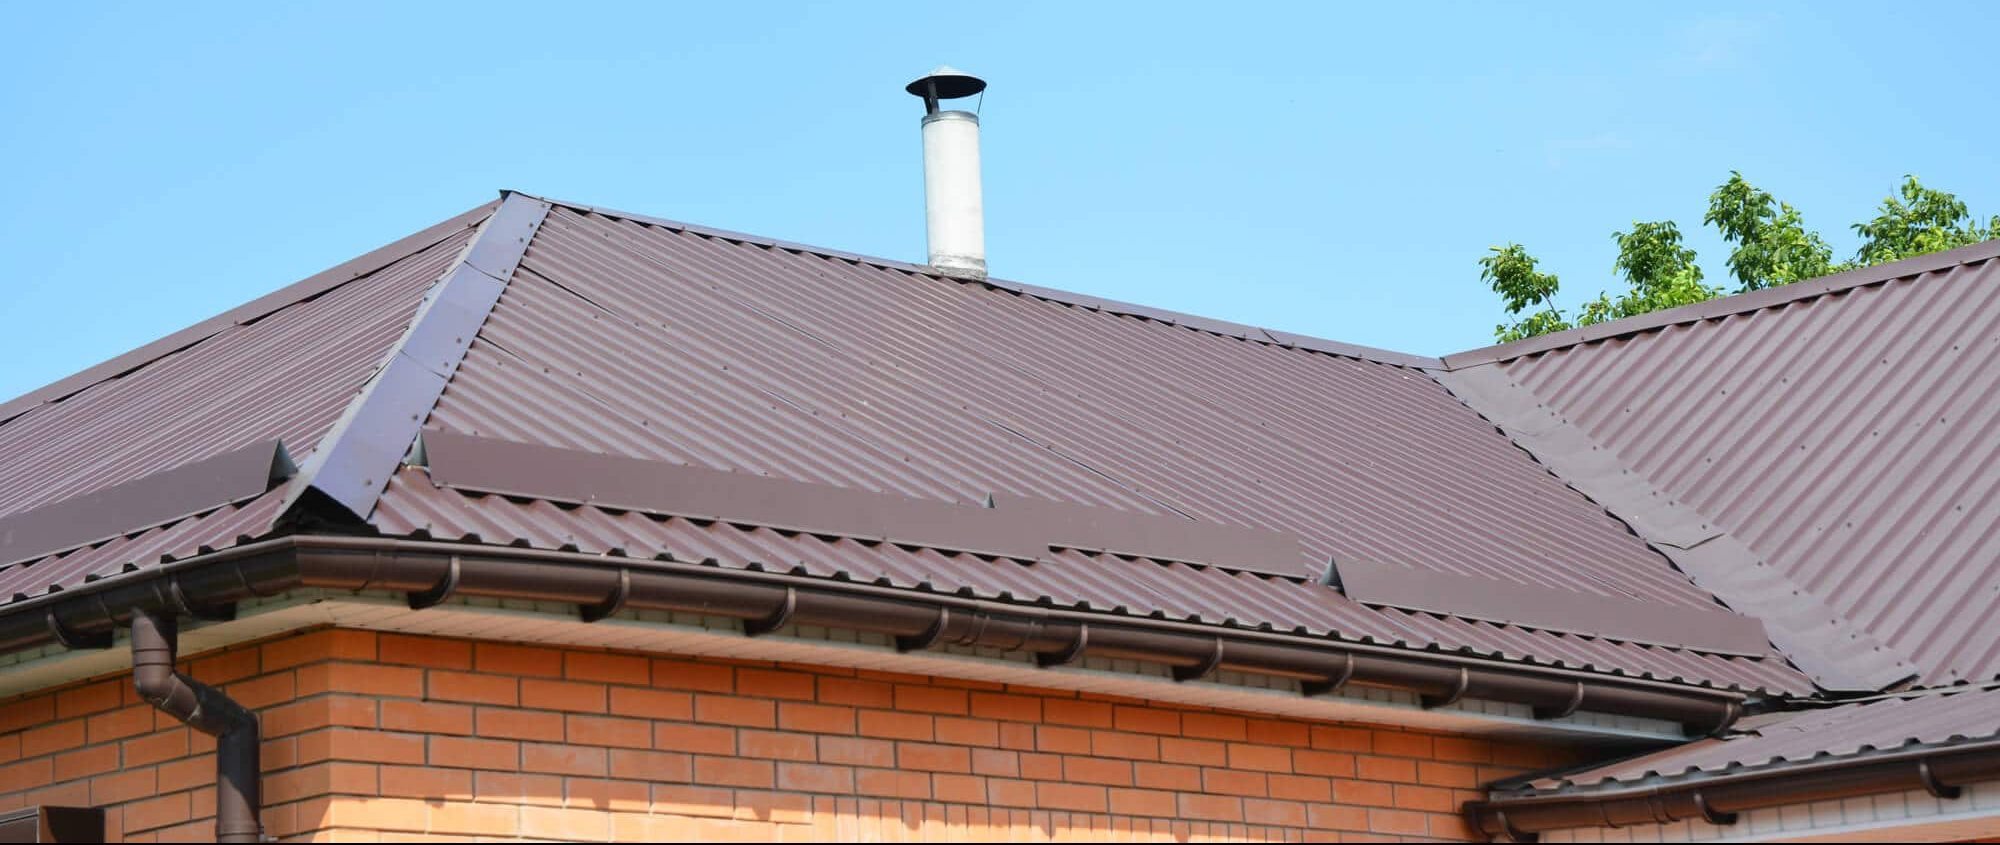 The Best Roofing Materials for Every Climate - Advantage Construction